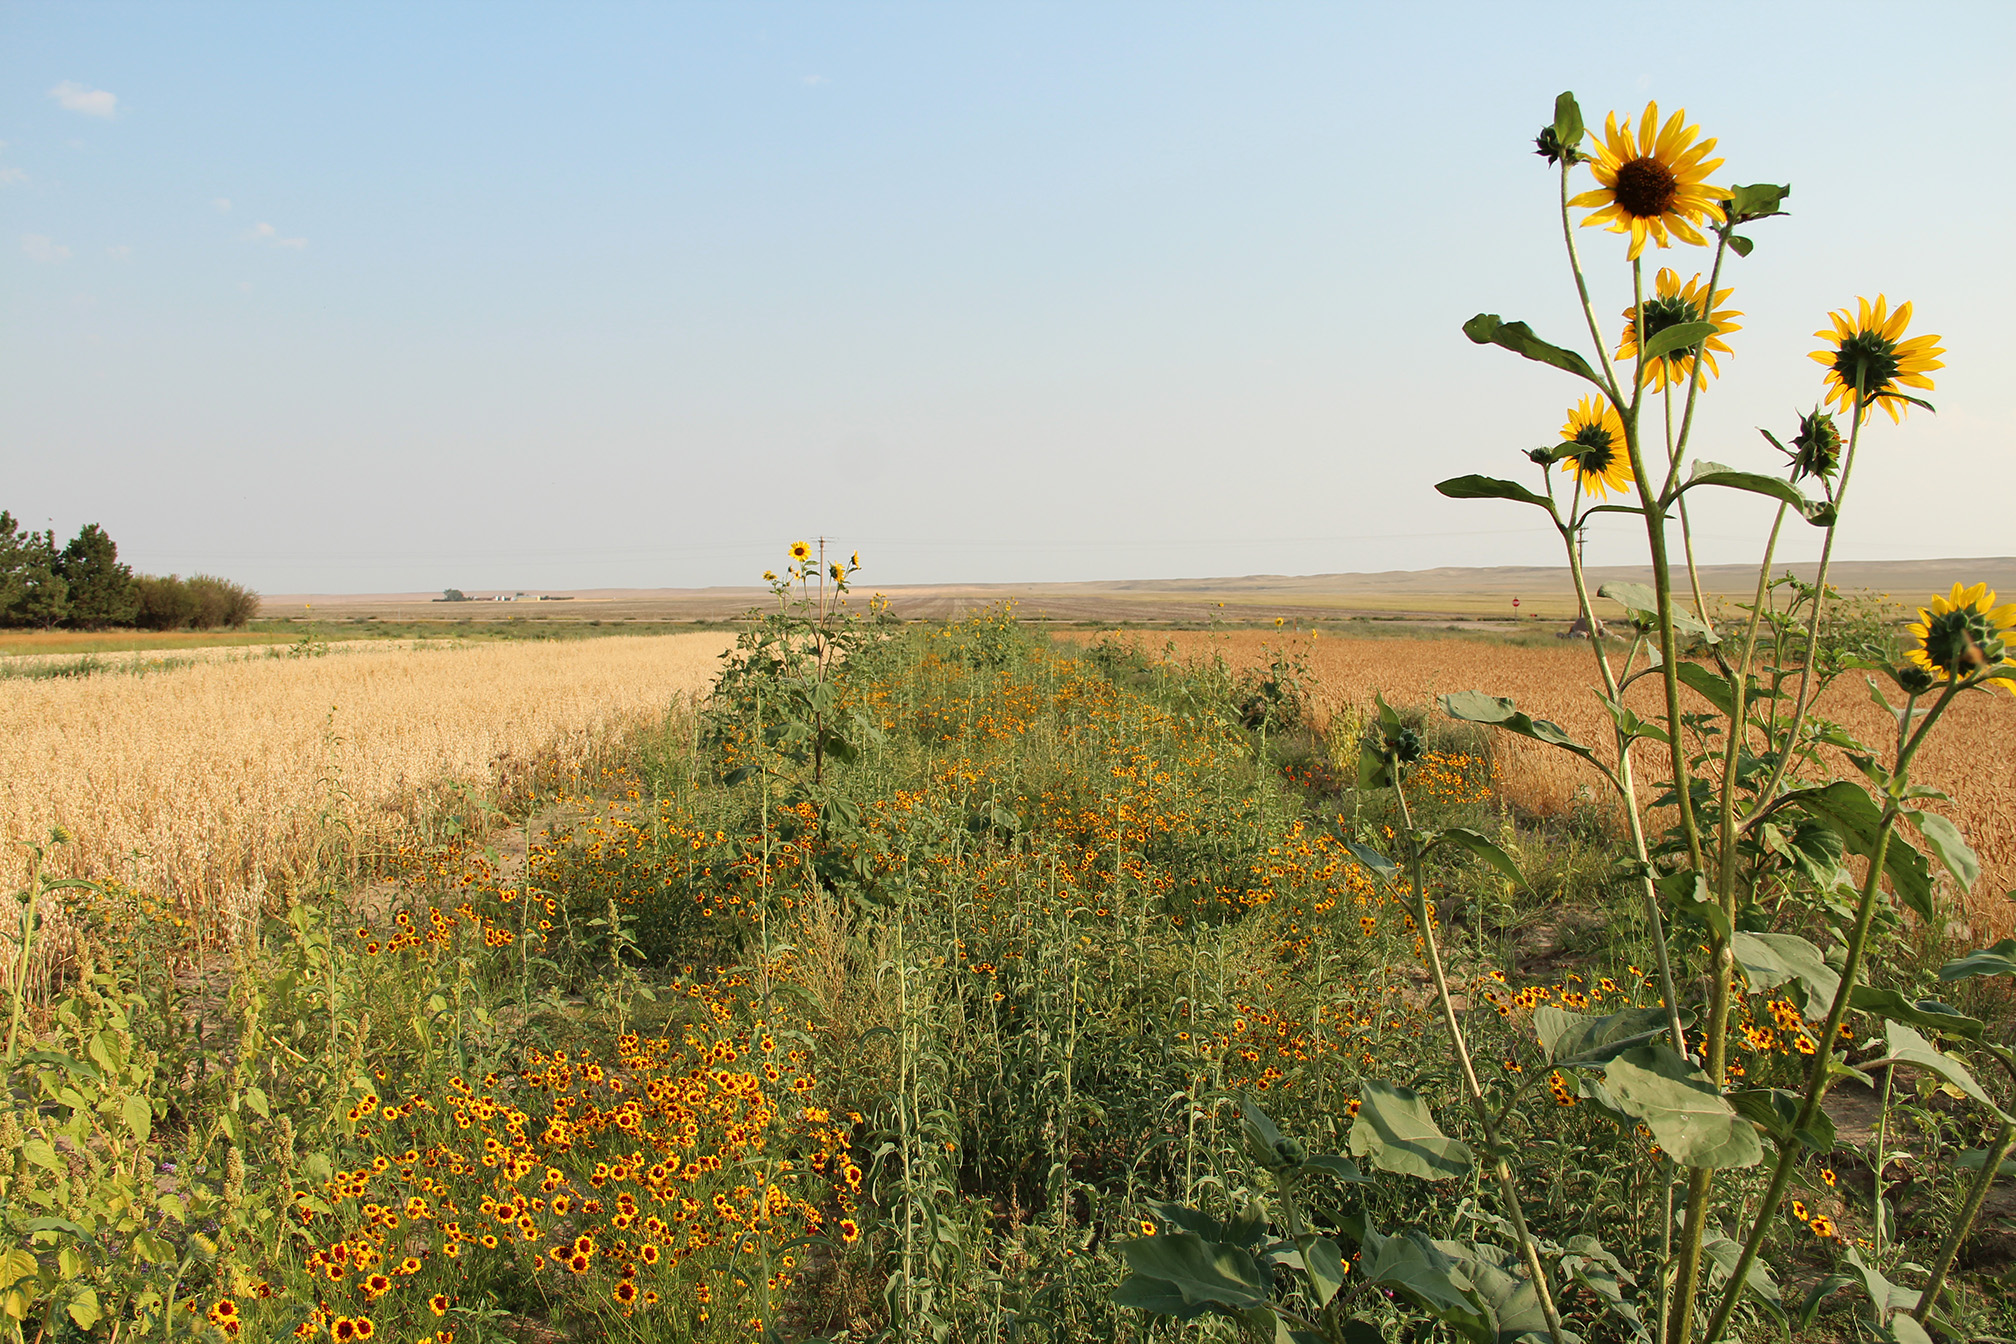 A mass of brightly colored wildflowers fill the habitat strip between two fields of golden-grown wheat. Yellow-petaled sunflowers stand tall against the blue sky